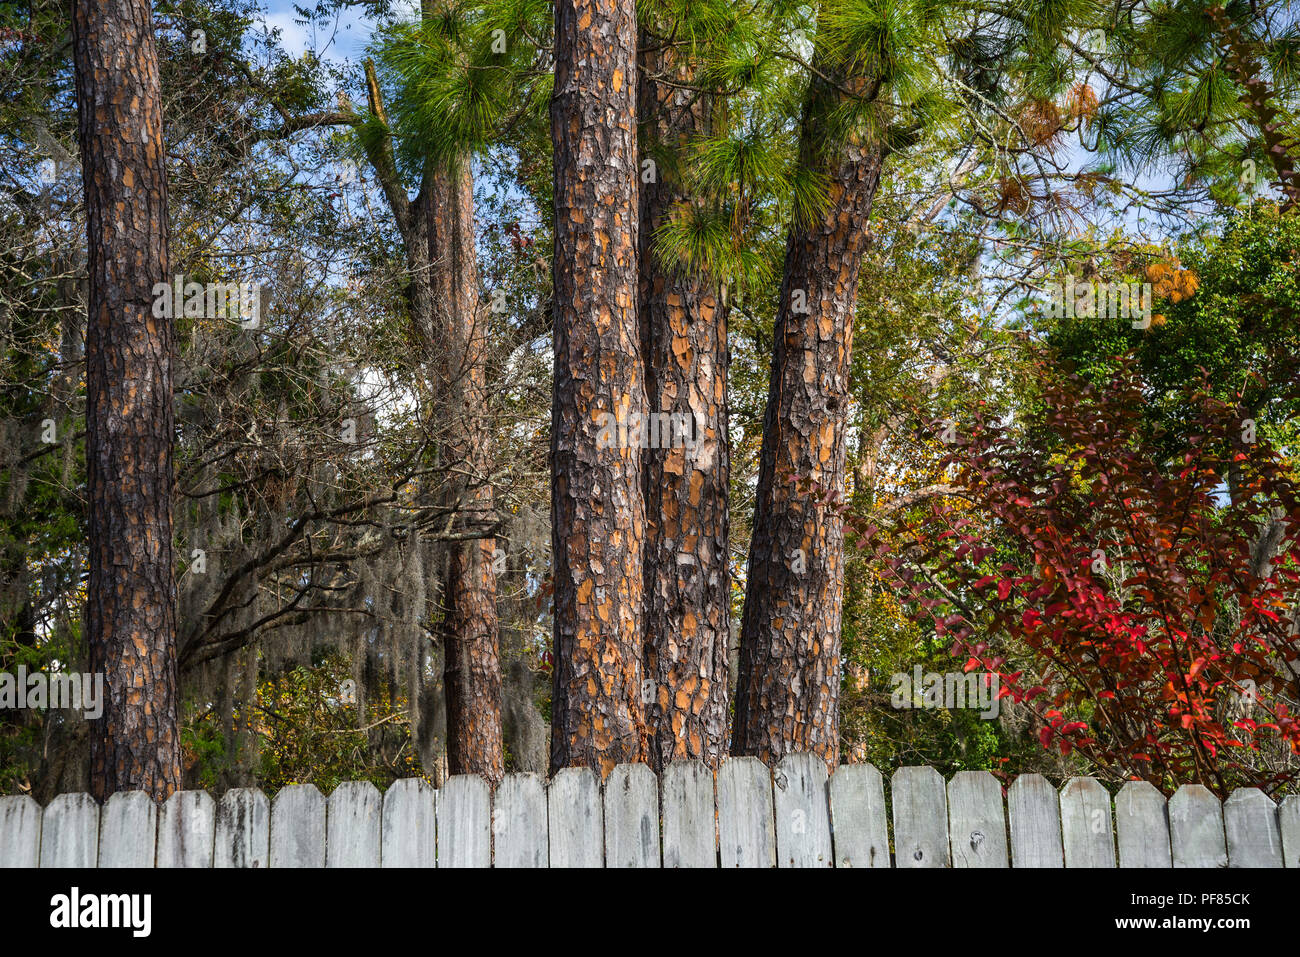 Natural landscape showing details of native Florida pine trees and other vegetation. Stock Photo